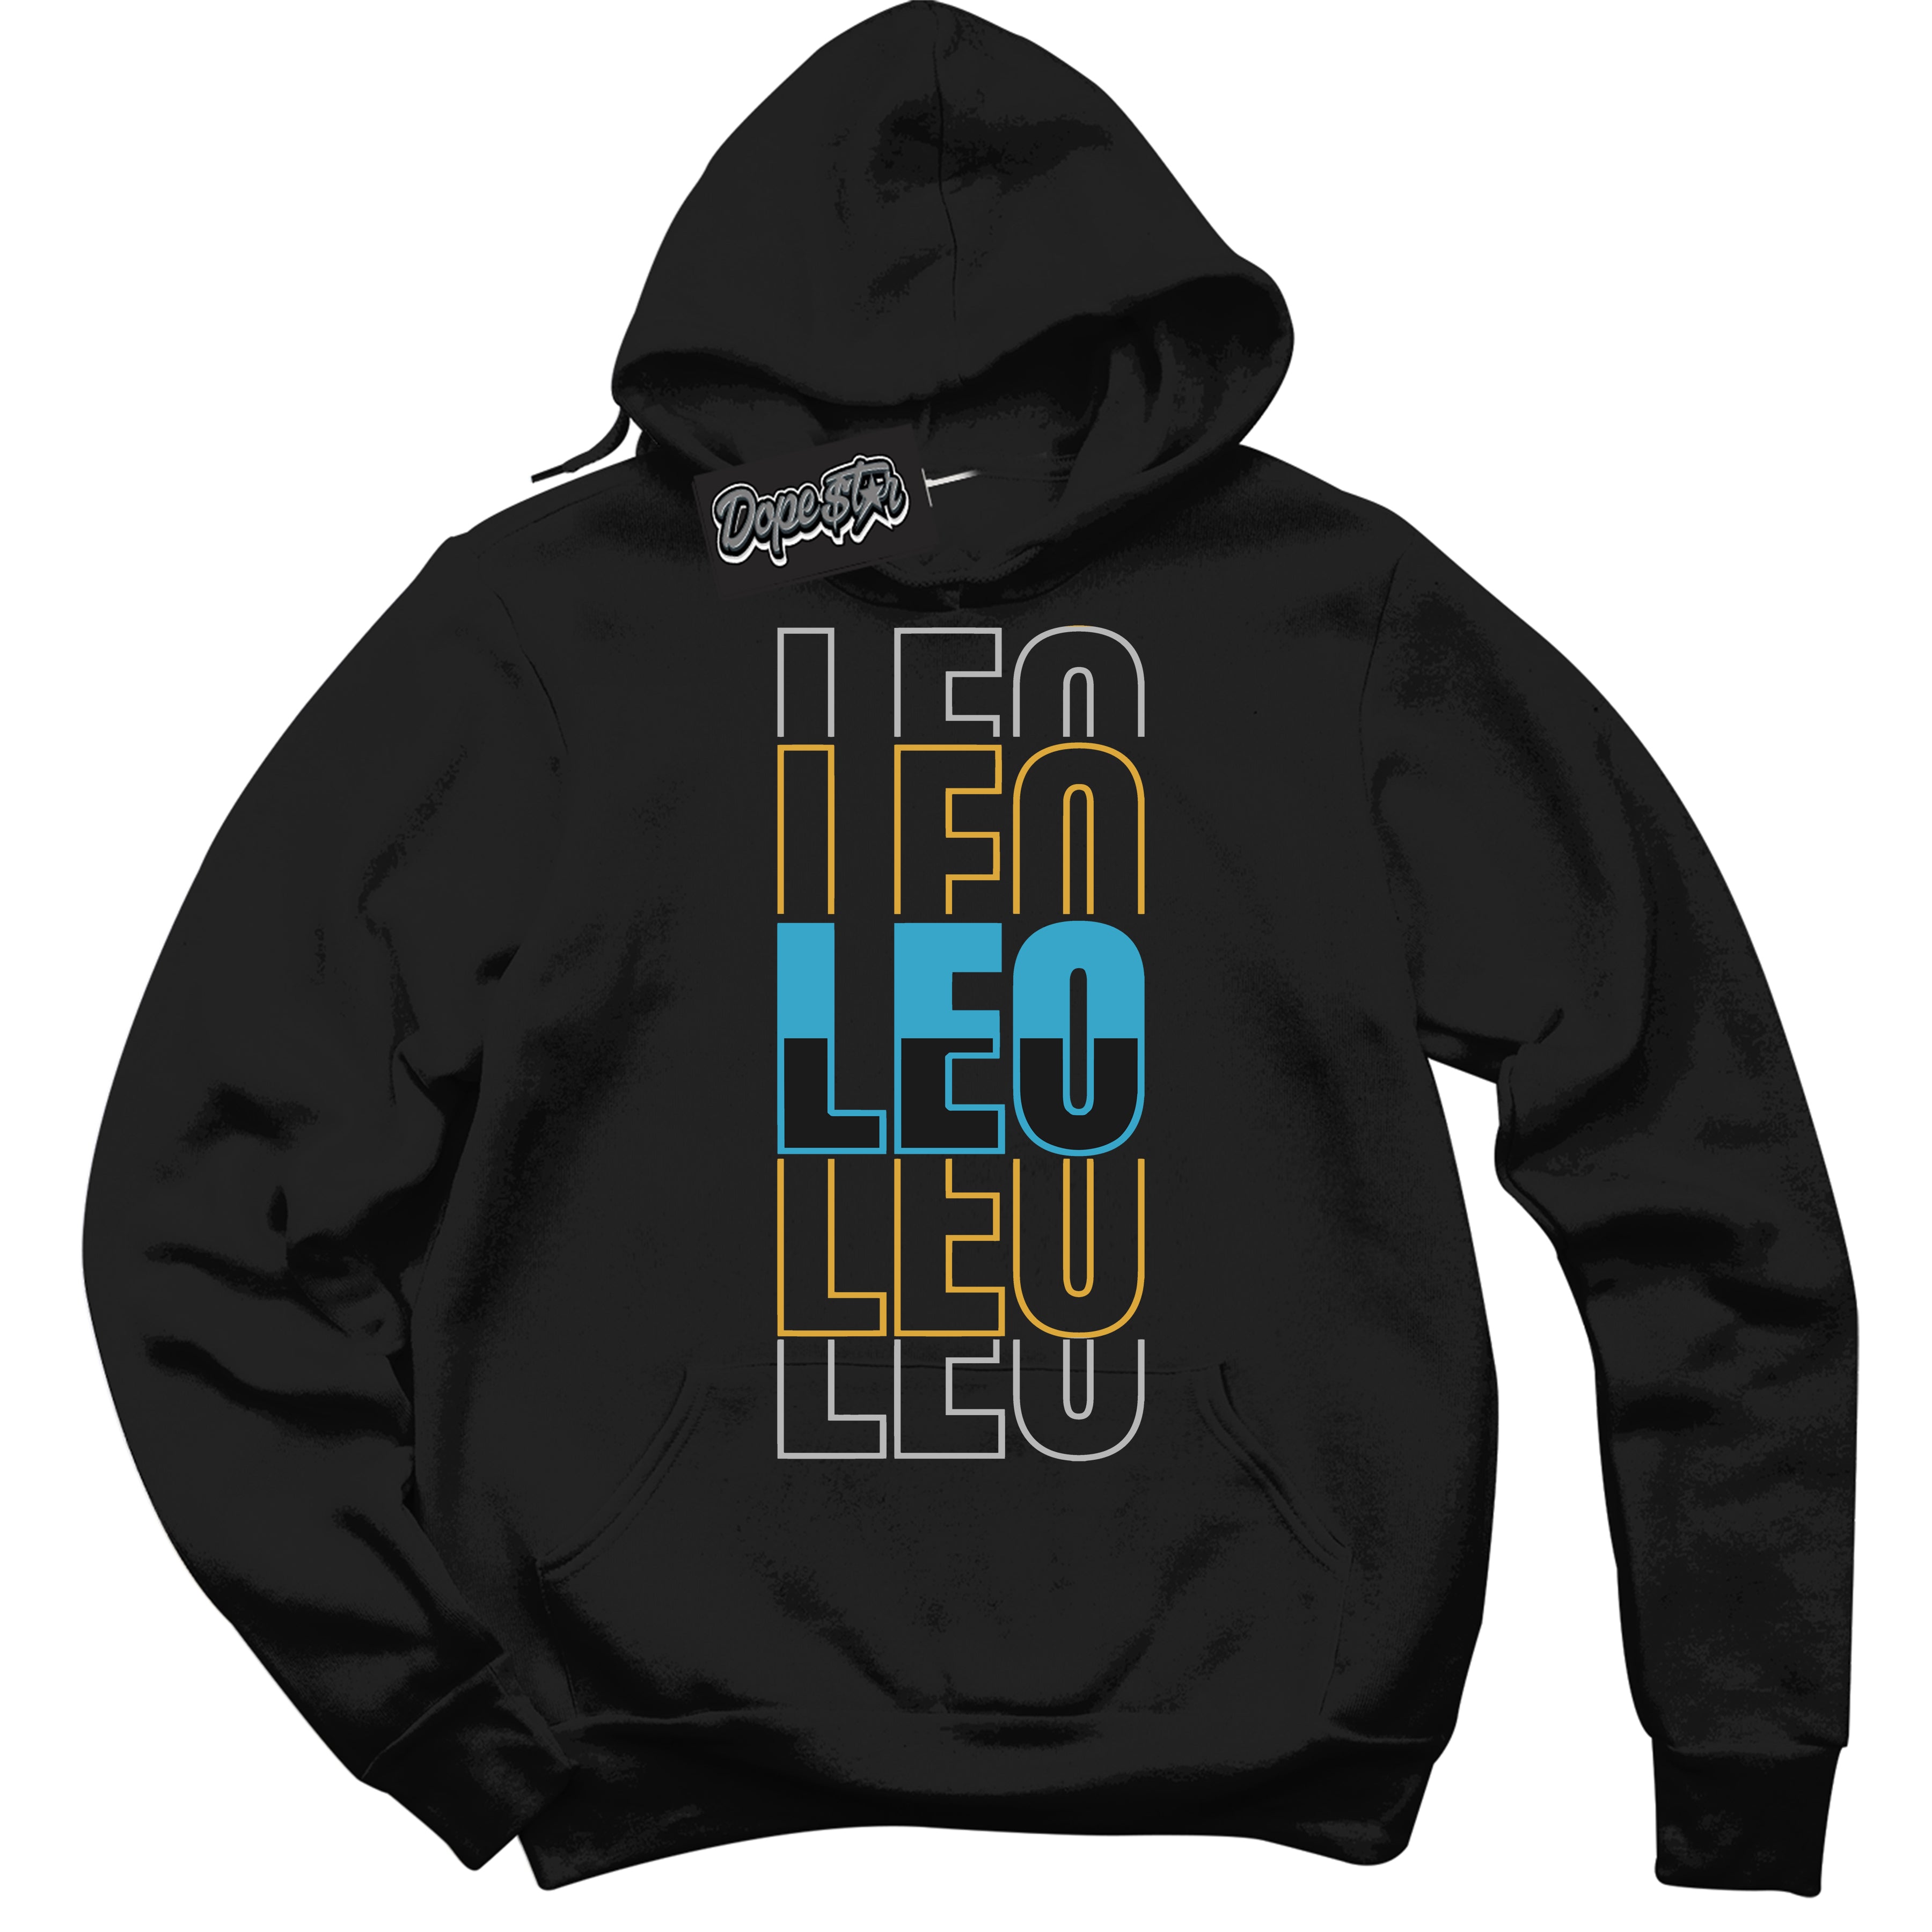 Cool Black Hoodie with “ Leo ”  design that Perfectly Matches Aqua 5s Sneakers.